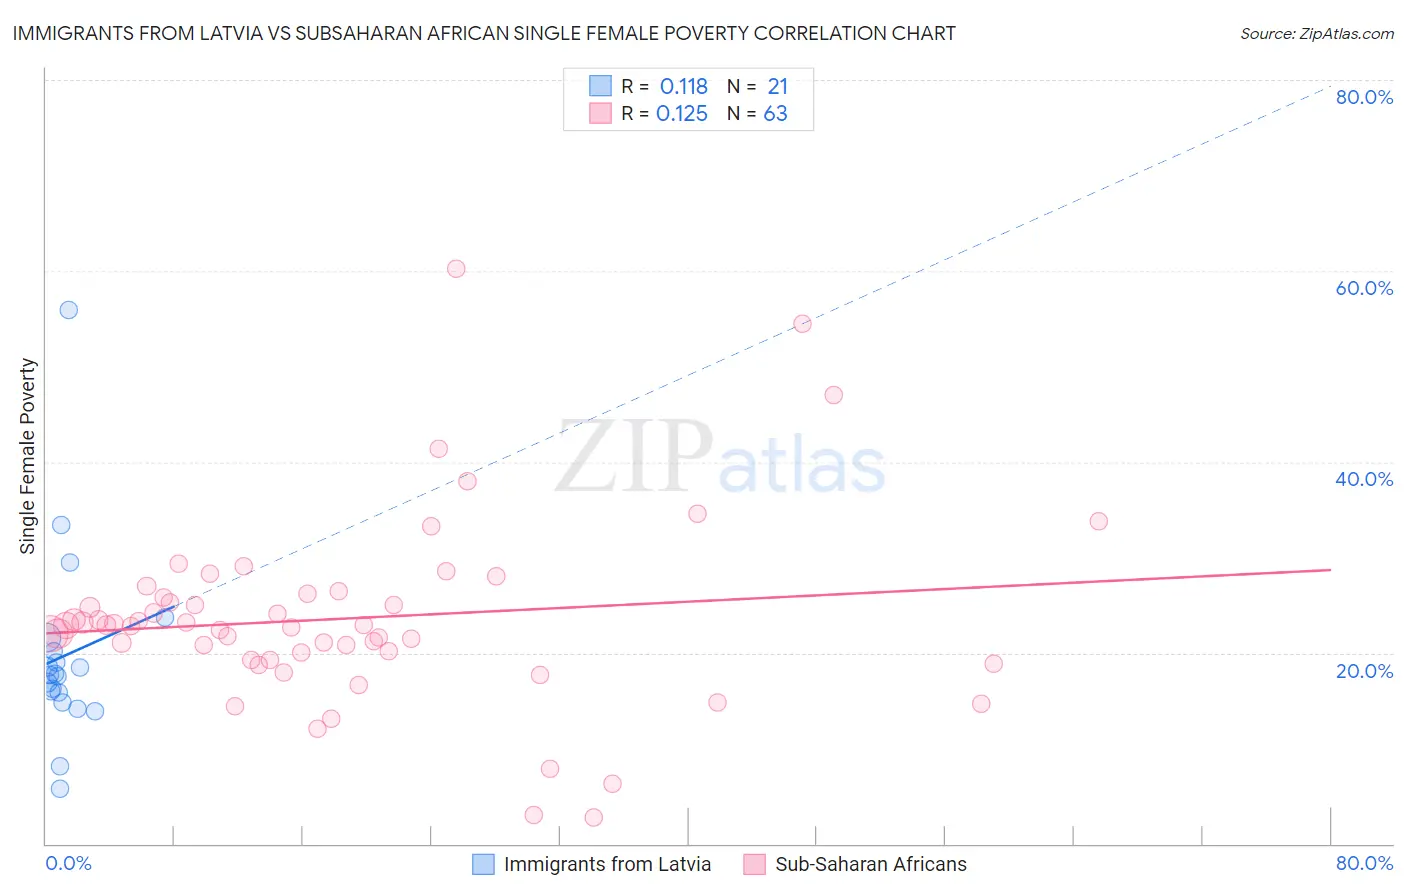 Immigrants from Latvia vs Subsaharan African Single Female Poverty